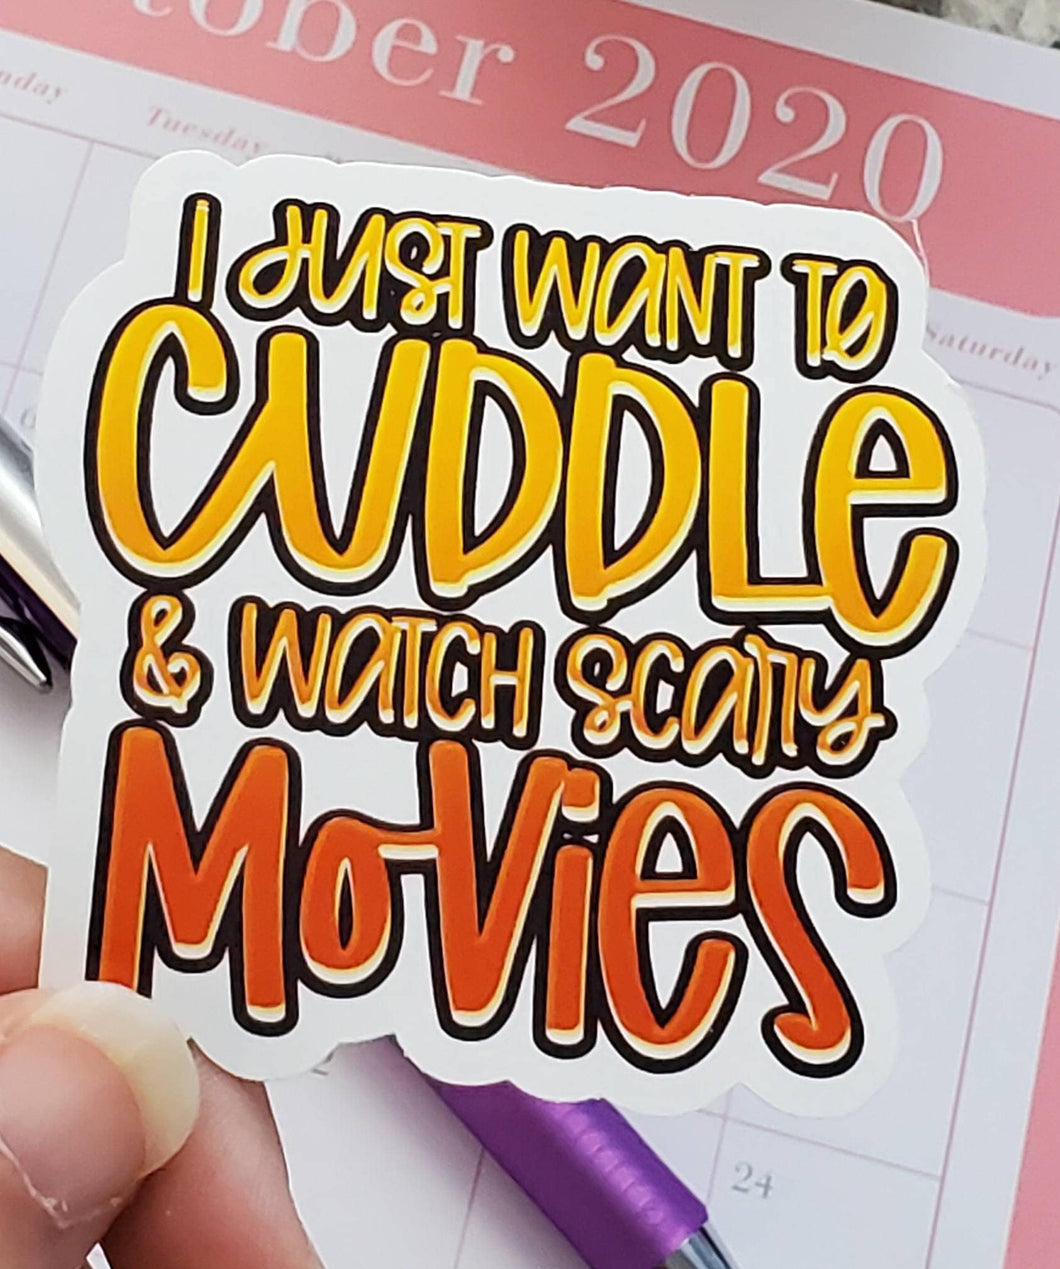 Cuddle and Watch Scary Movies Glossy Sticker